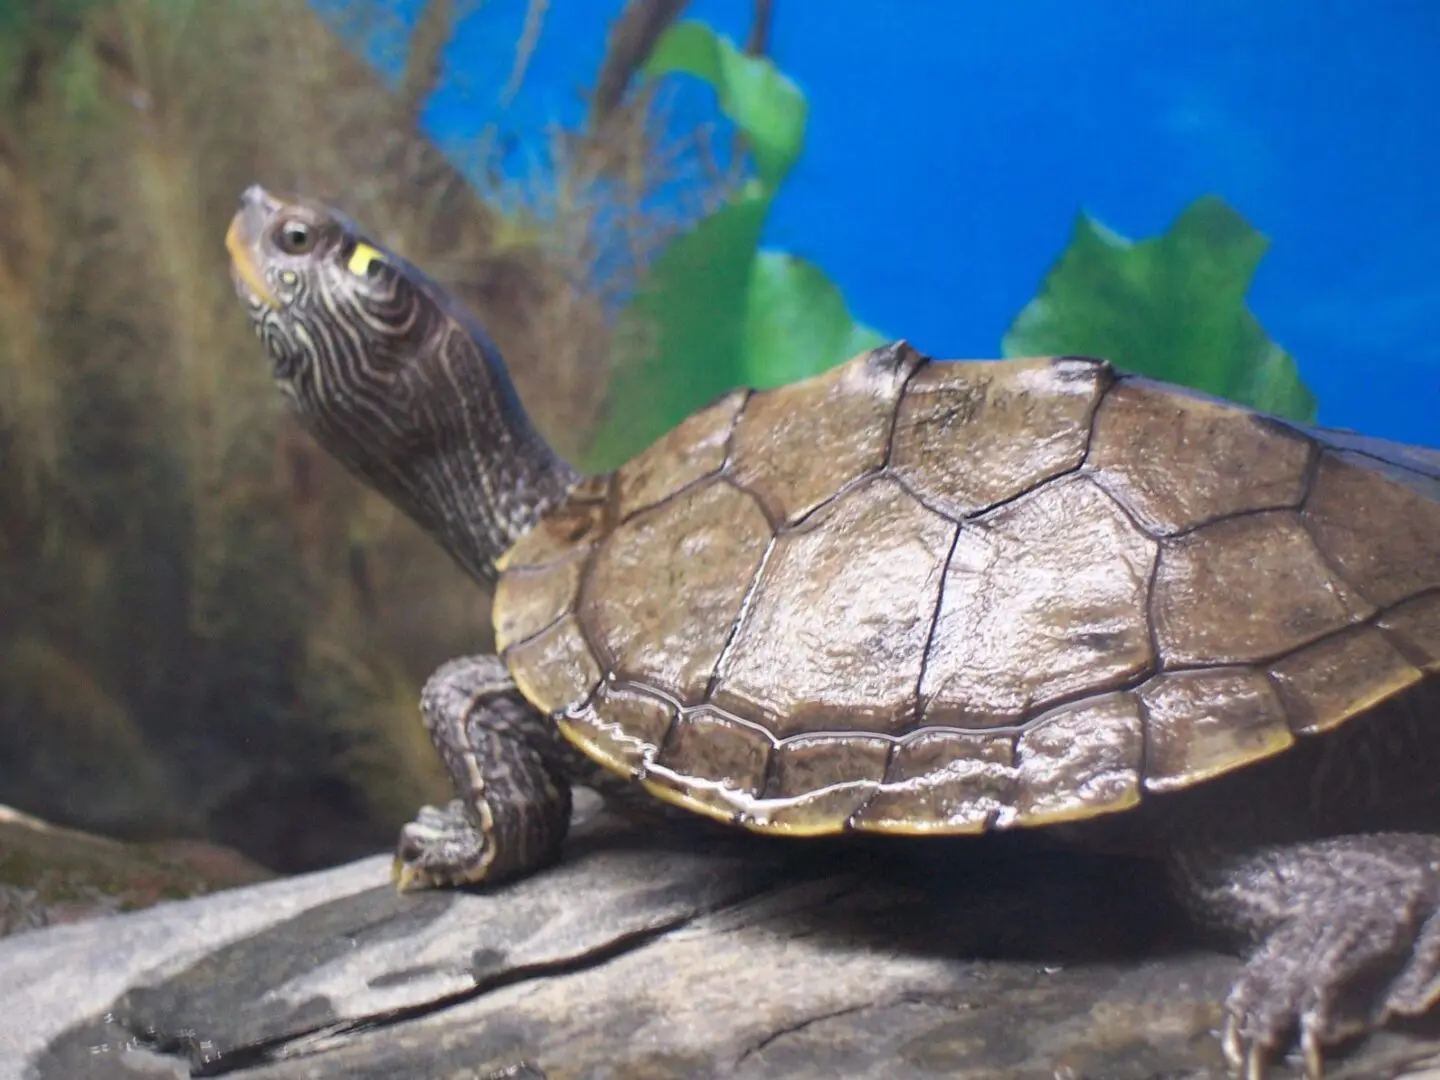 A turtle is sitting on the ground in an aquarium.